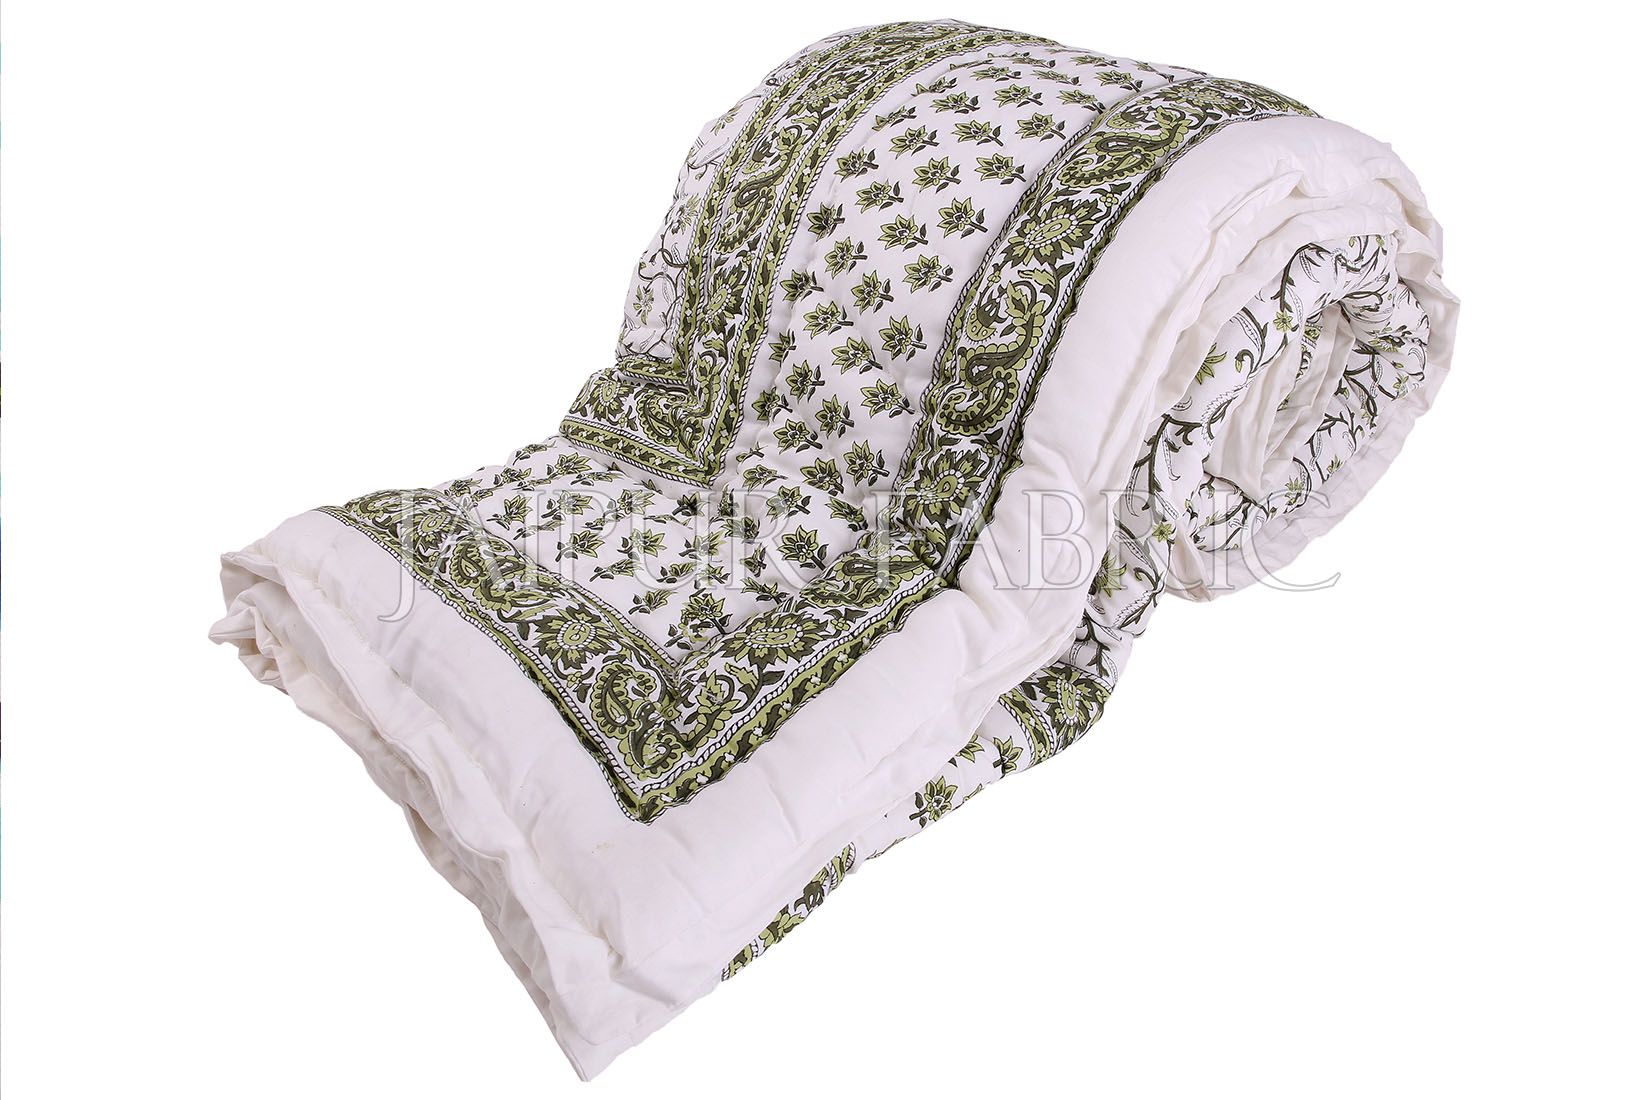 White Base Olive Tropical Print Cotton Double Bed Quilt